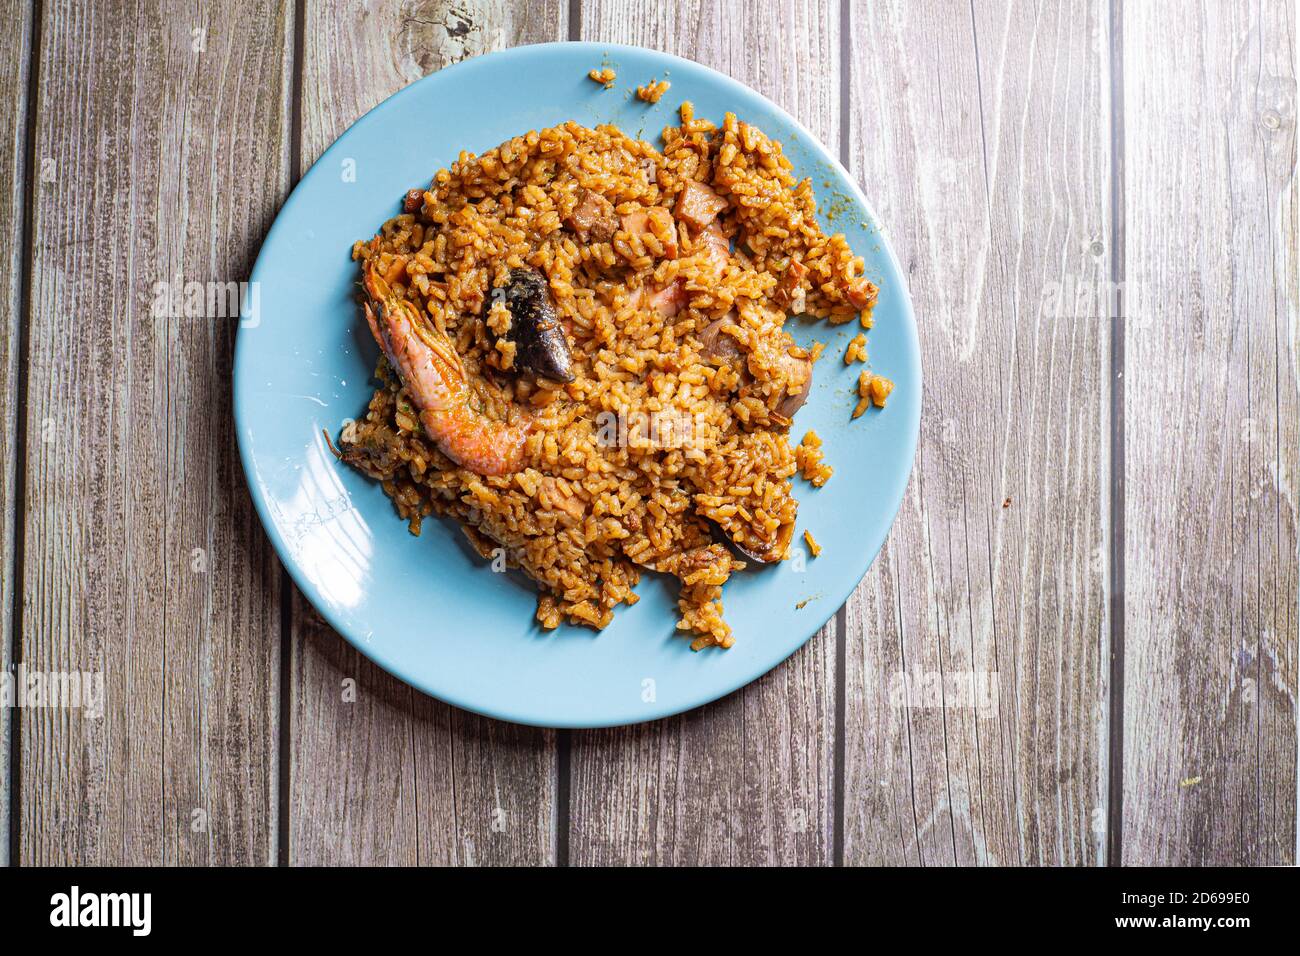 Paella yellow rice served with prawns and seafood on a blue plate Stock Photo